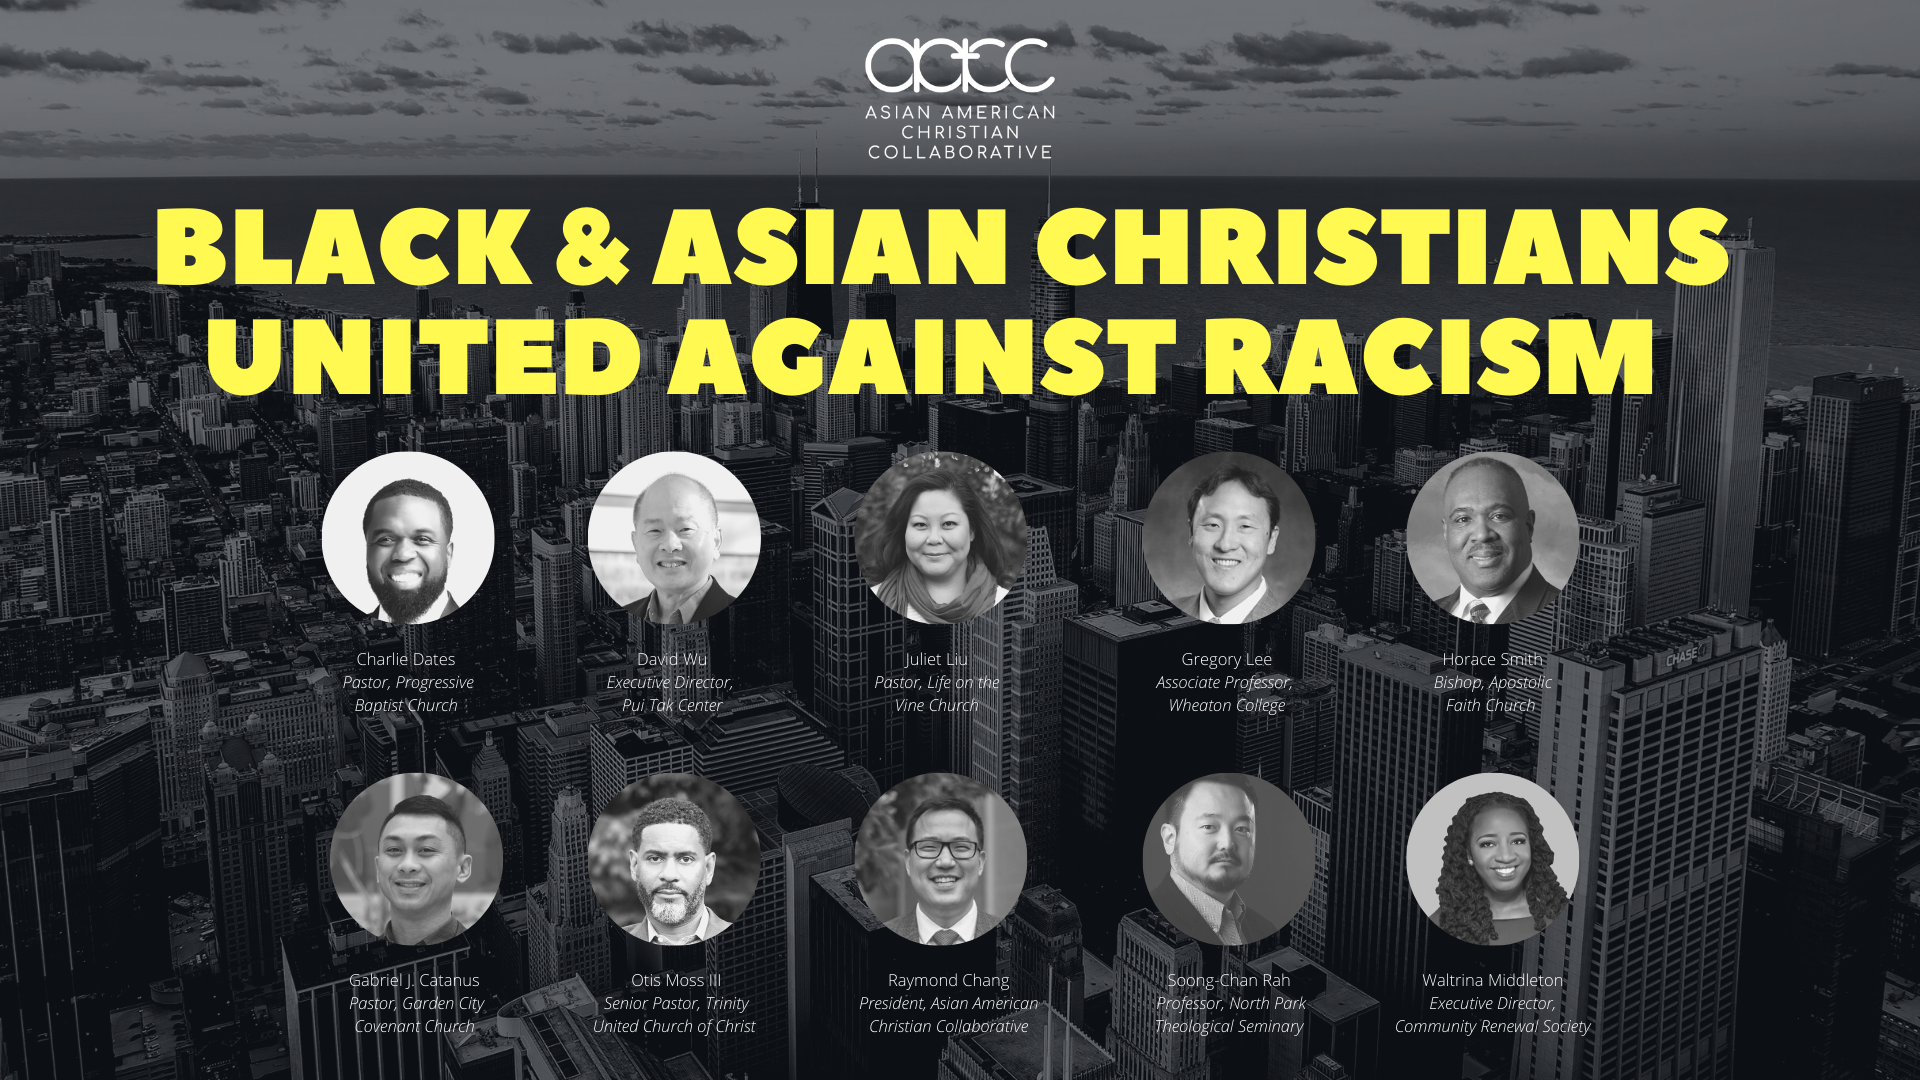 Black & Asian Christians United Against Racism @ April 5, 2021 in Chicago